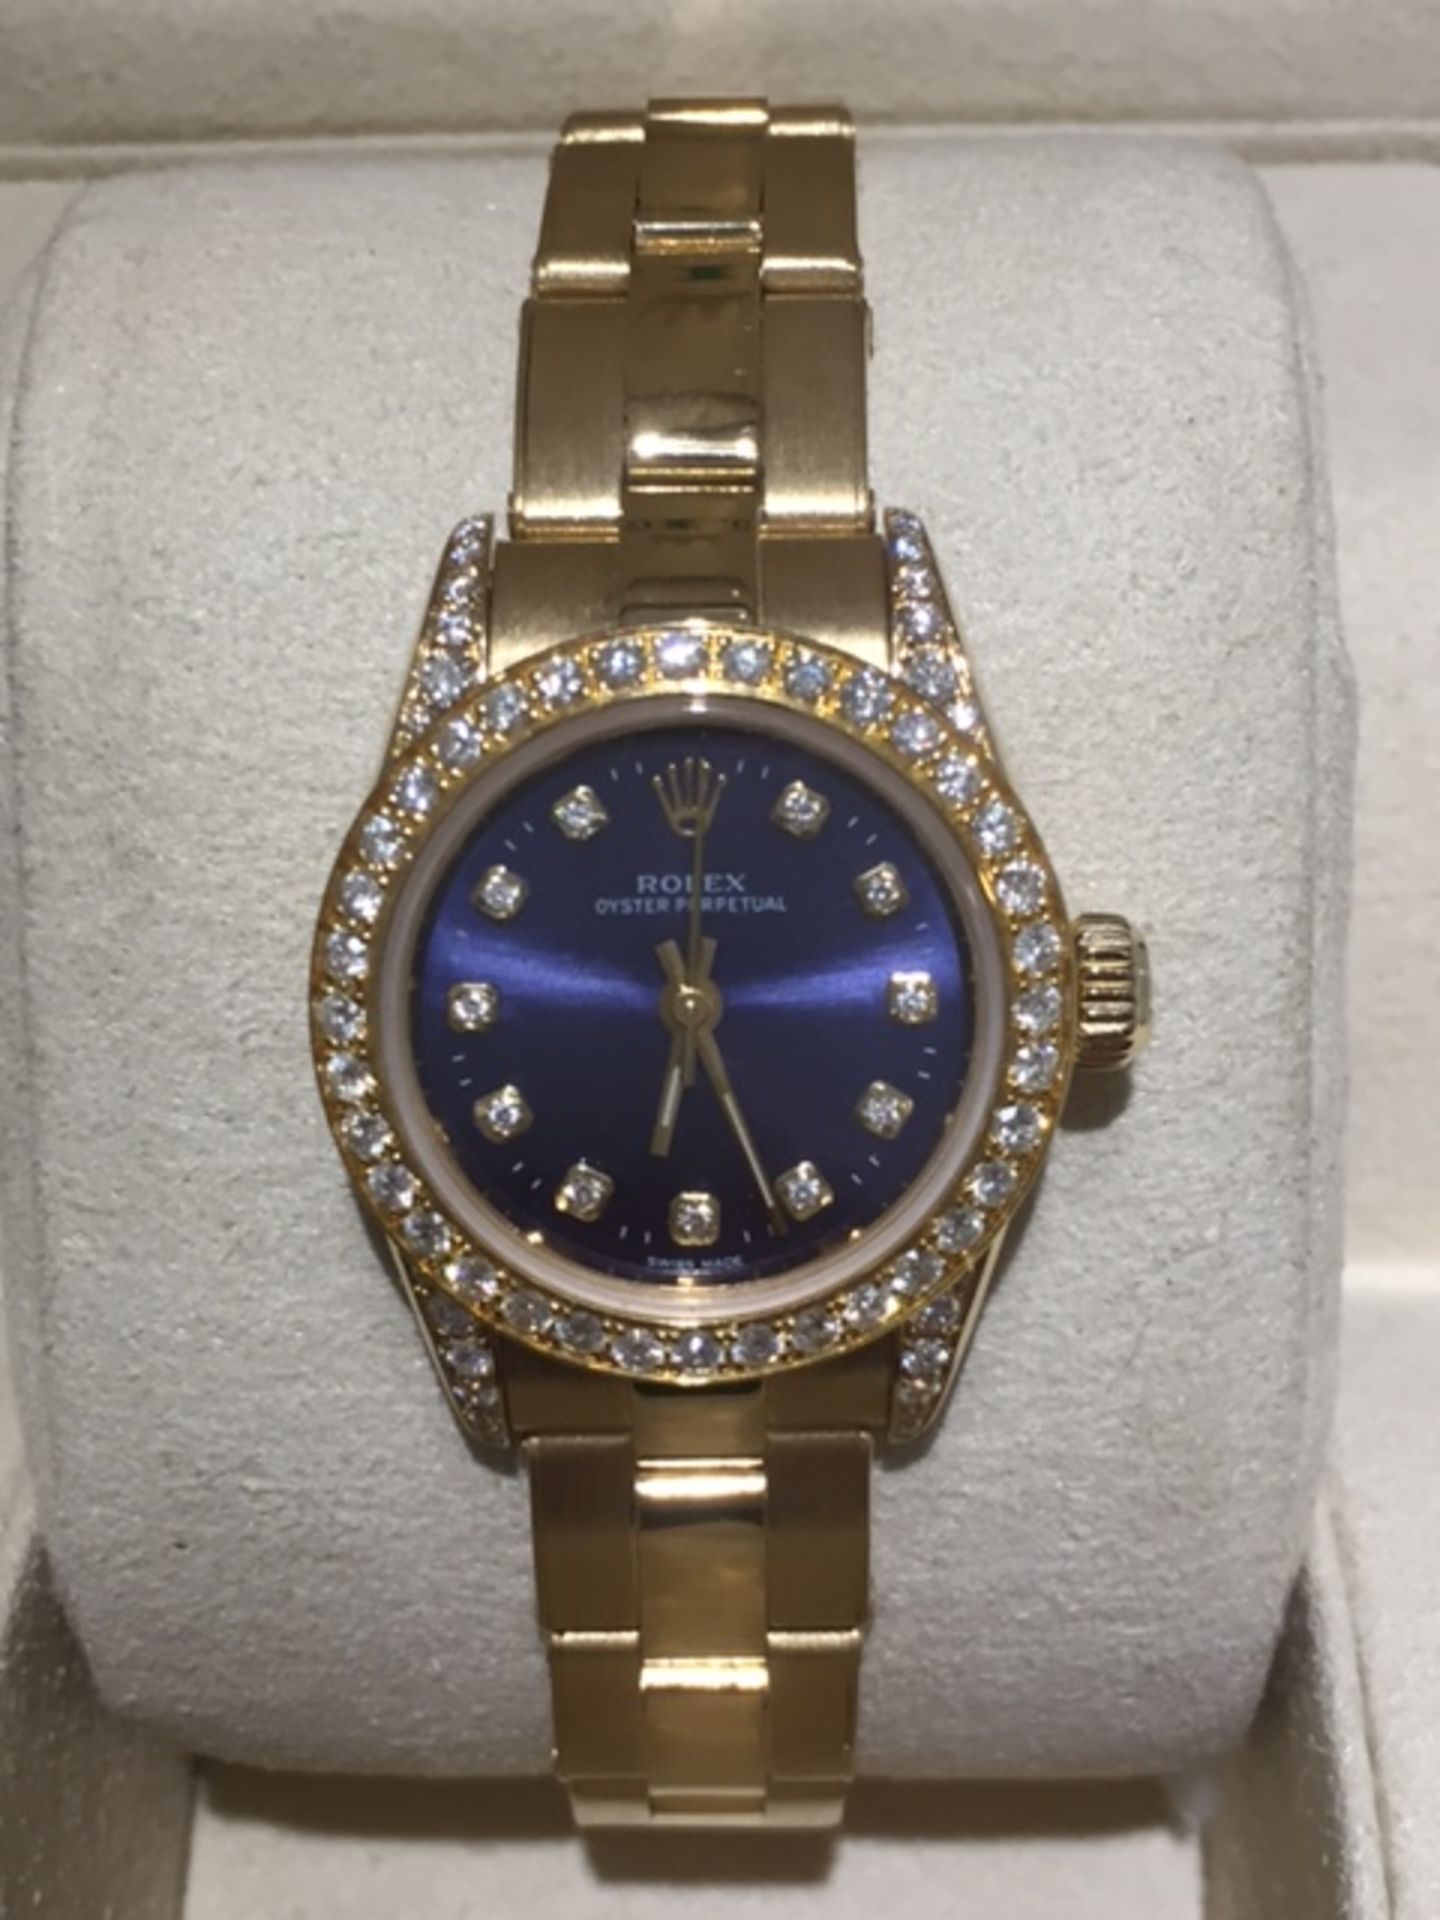 LADIES ROLEX 18ct SOLID GOLD OYSTER PERPETUAL AFTER SET WITH DIAMOND DIAL, DIAMOND BEZEL, DIAMOND